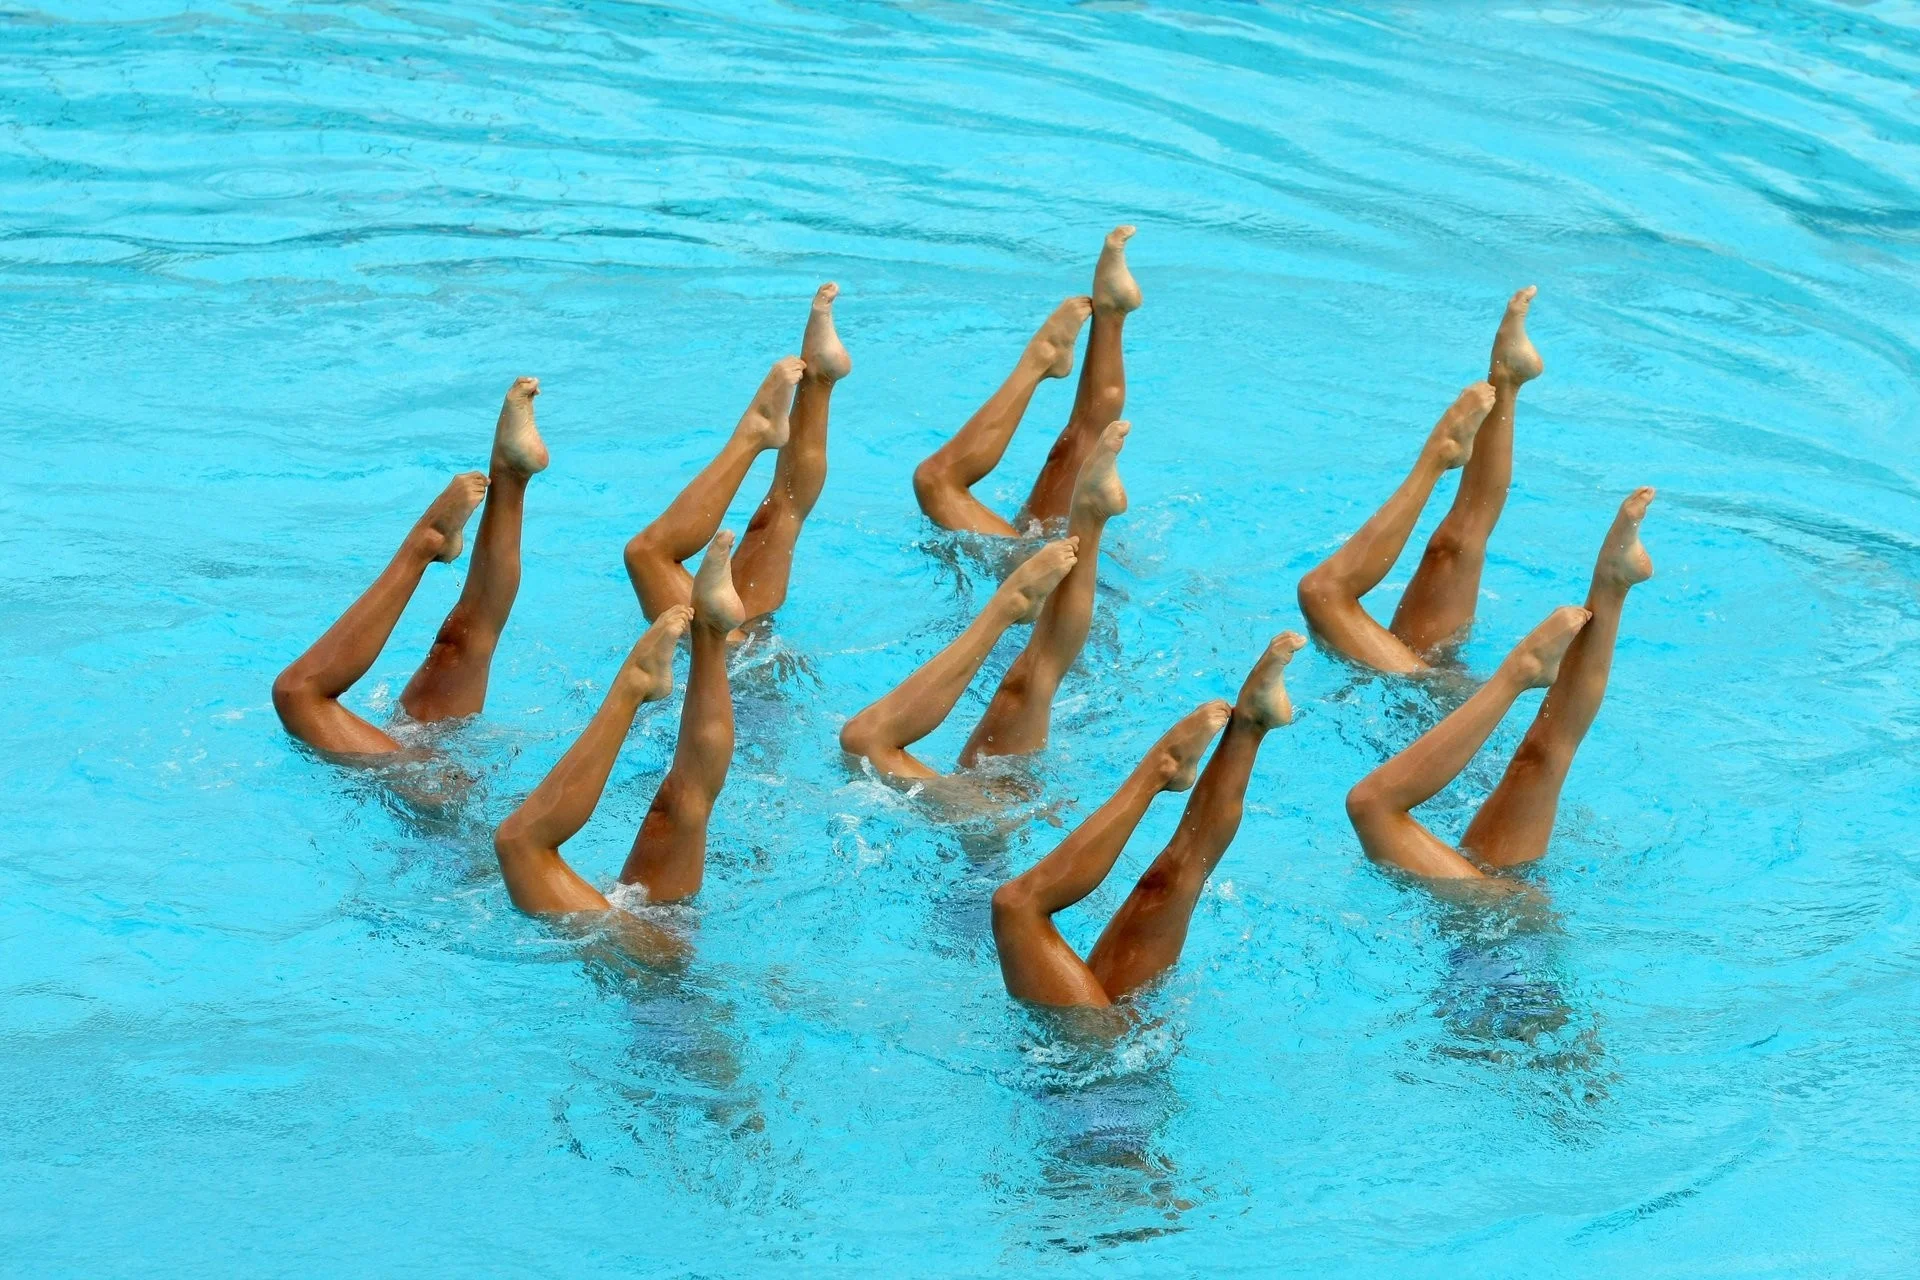 Pool water swimming feet figure swimming water ballet synchronized swimming